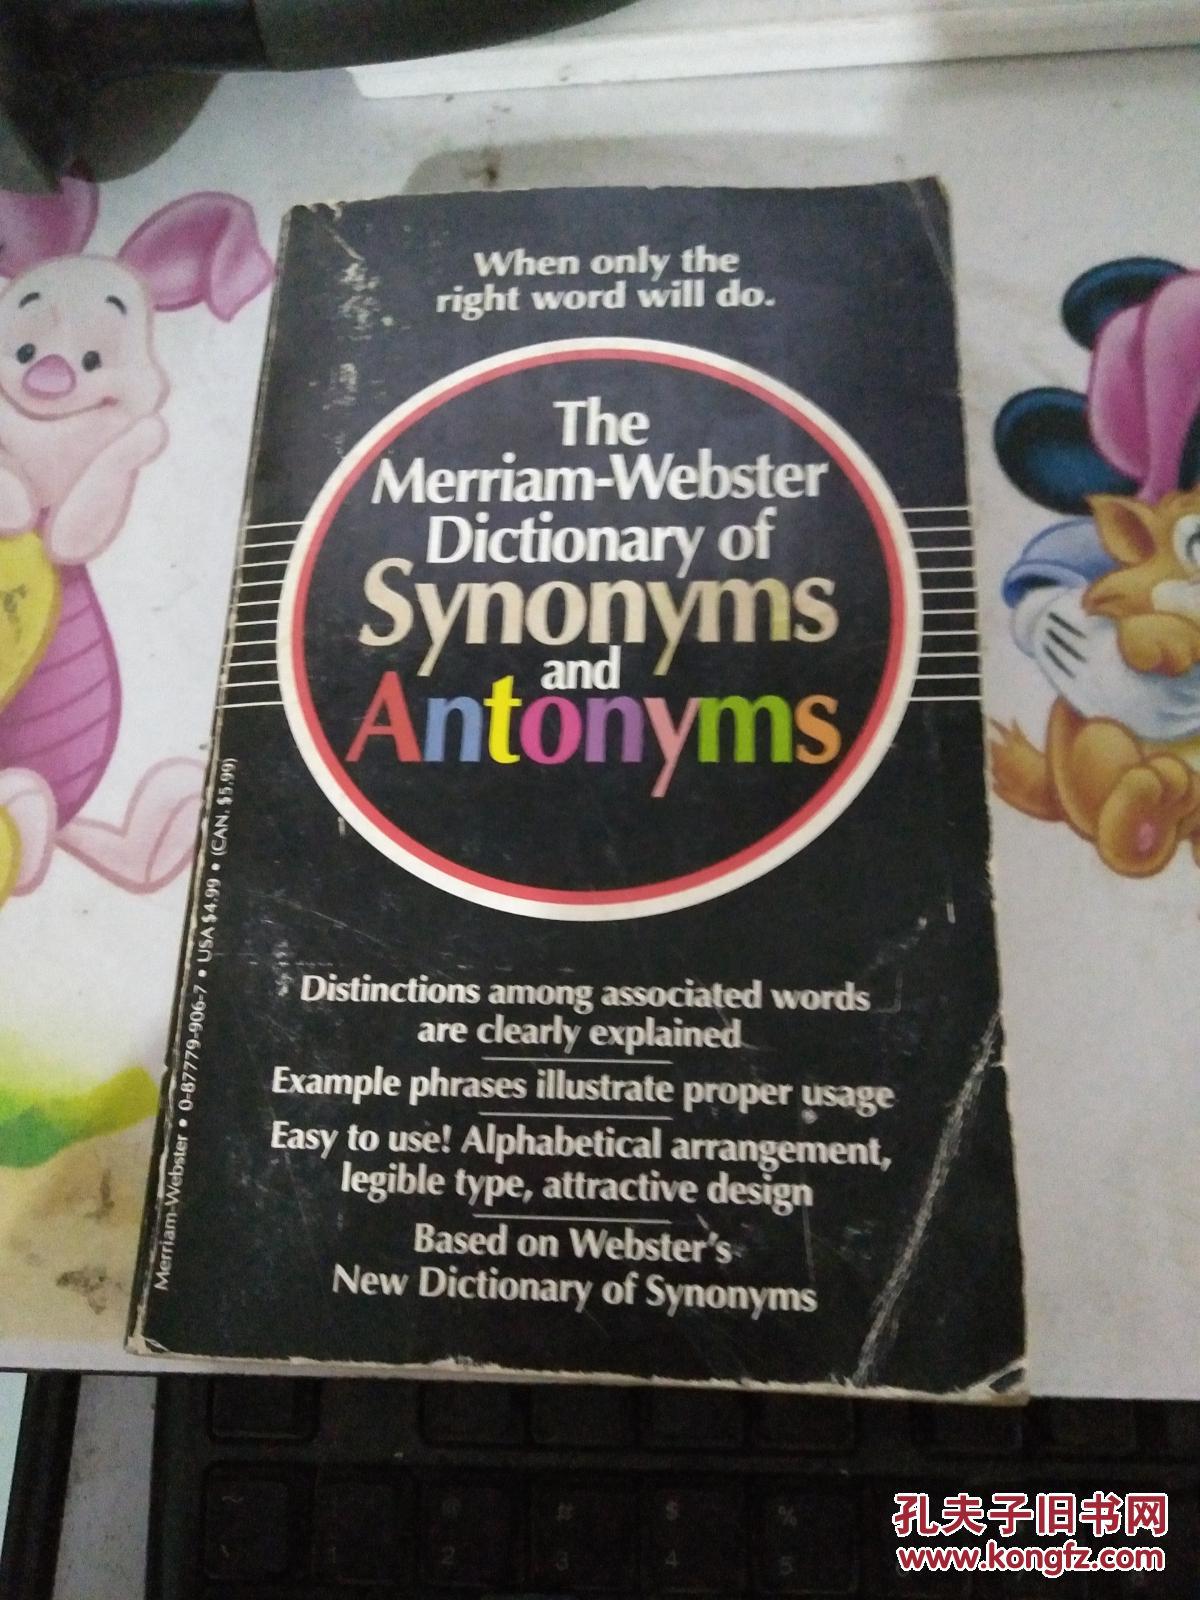 The Merriam-WEbster DictionaryofSynonymsa